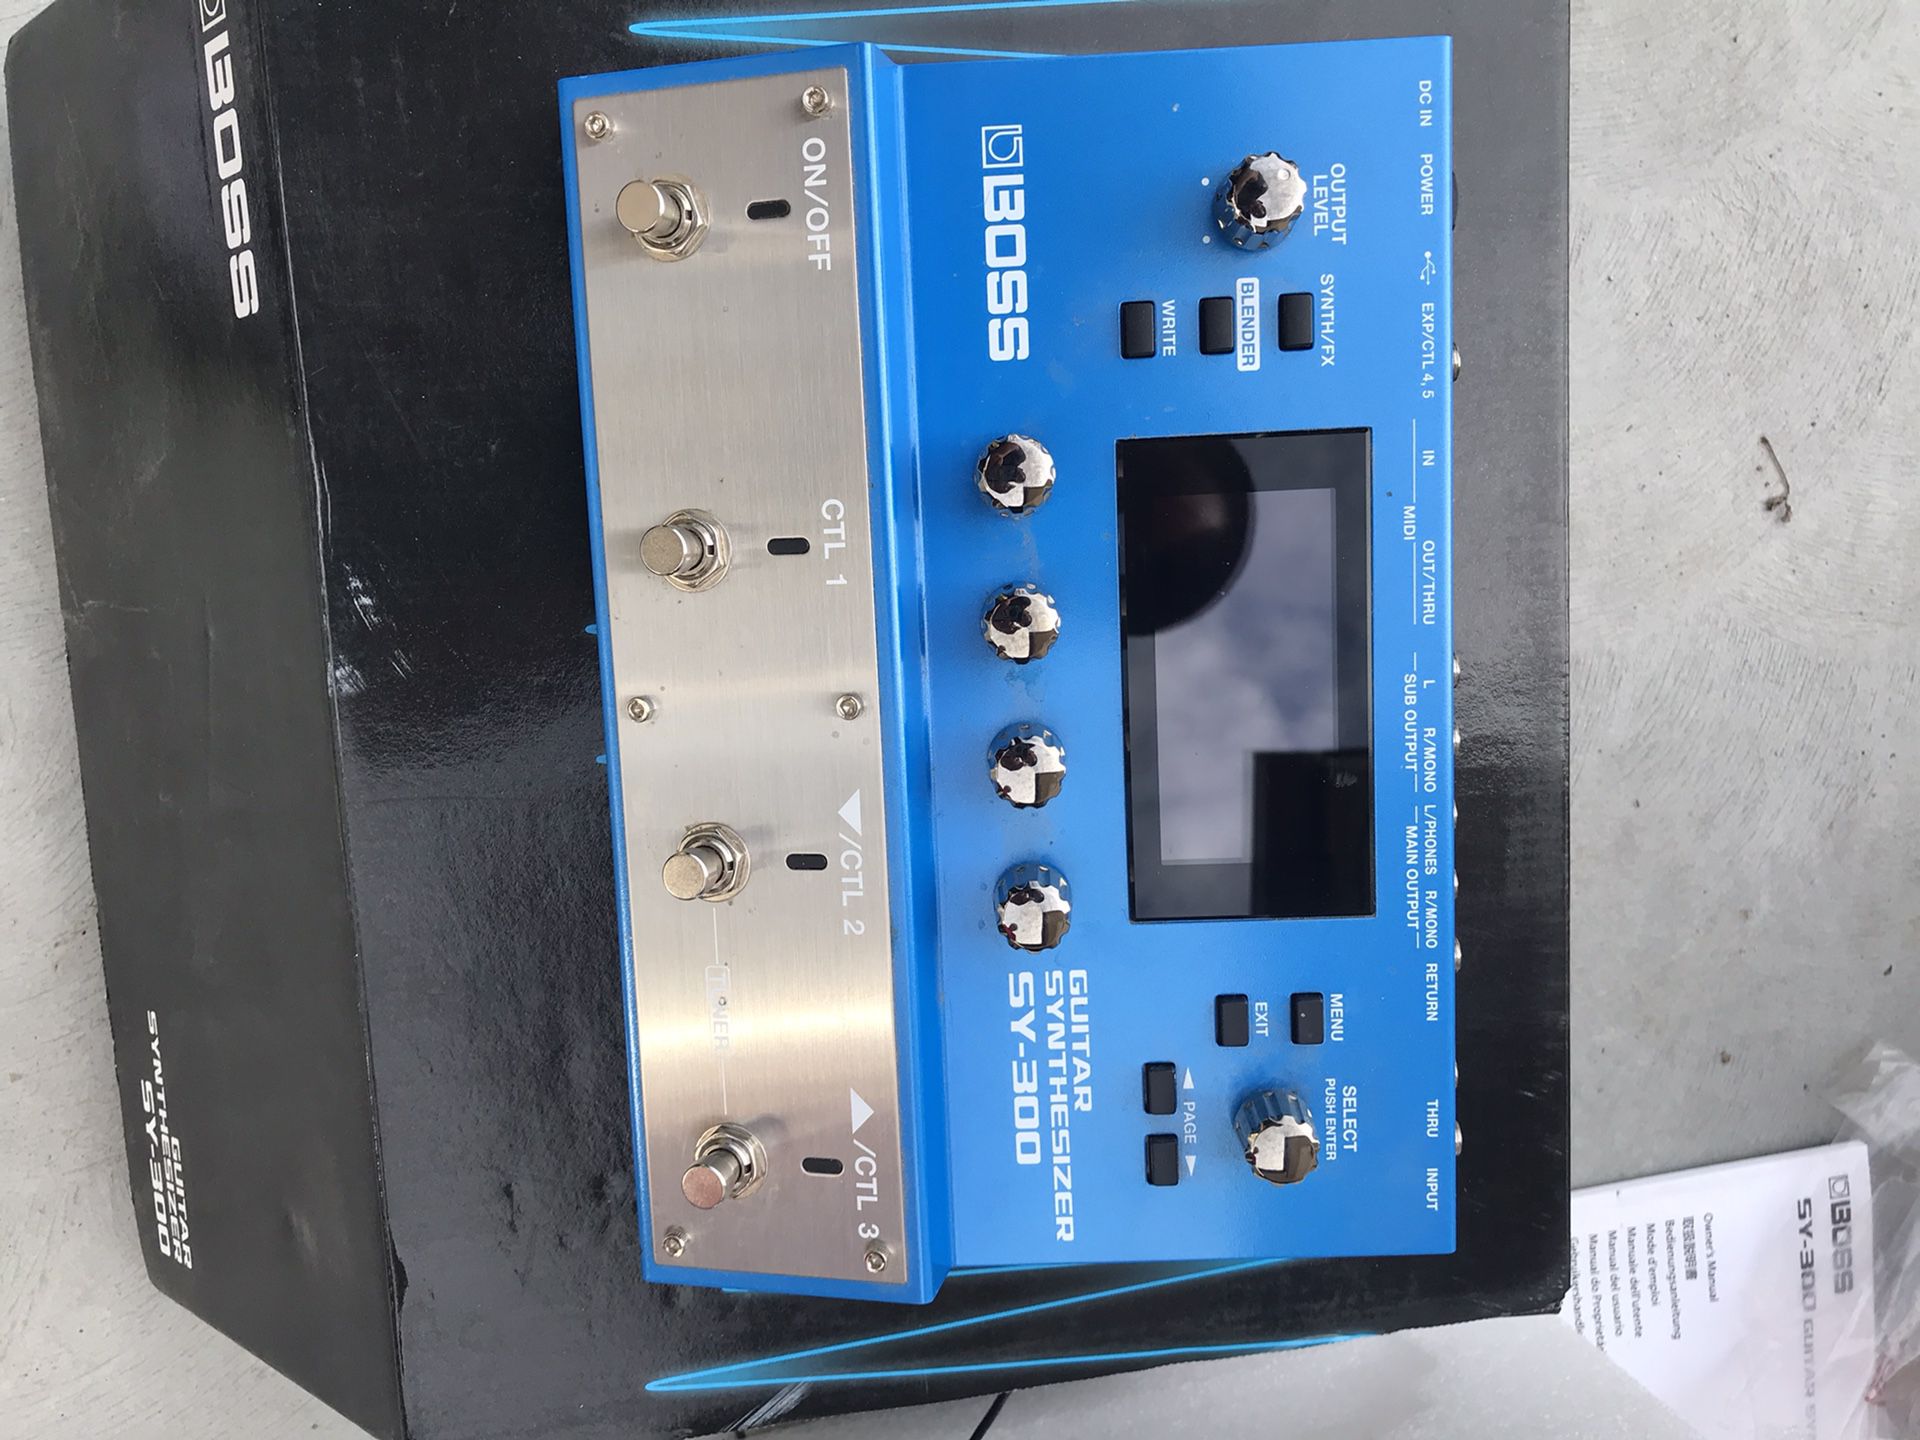 SY- 300 Boss Guitar Synthesizer